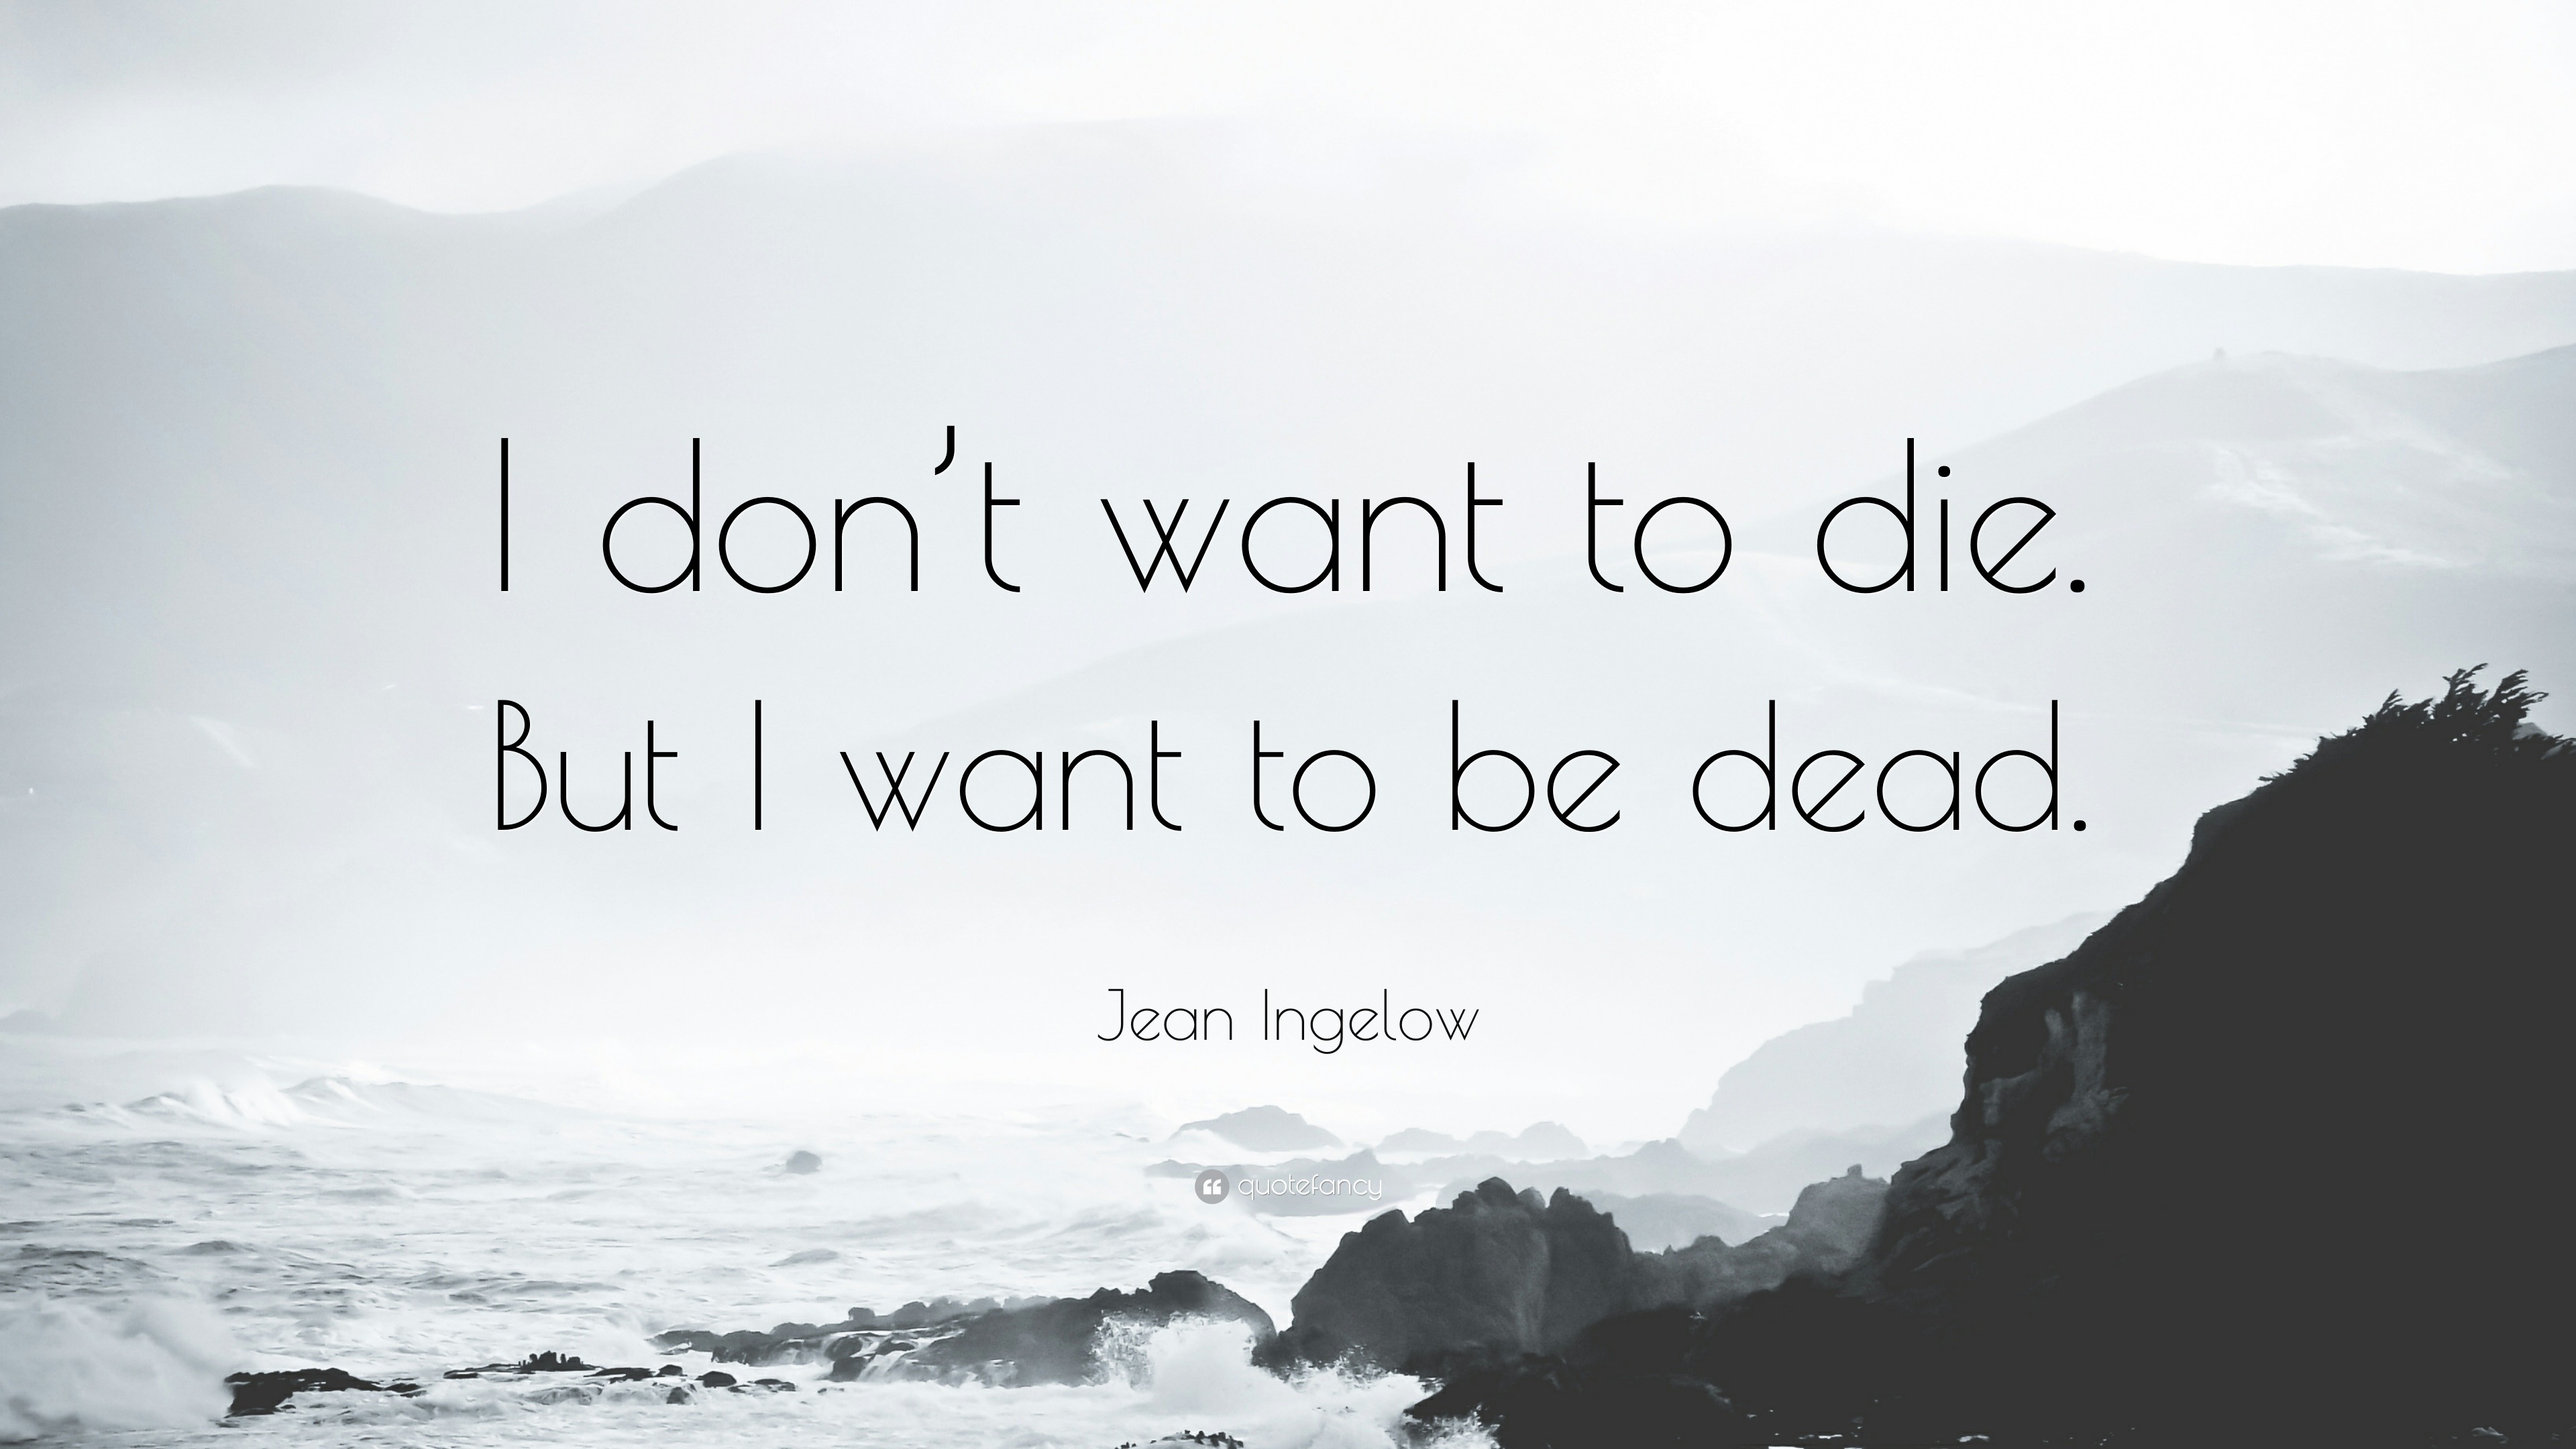 Jean Ingelow Quote: "I don't want to die. But I want to be dead."